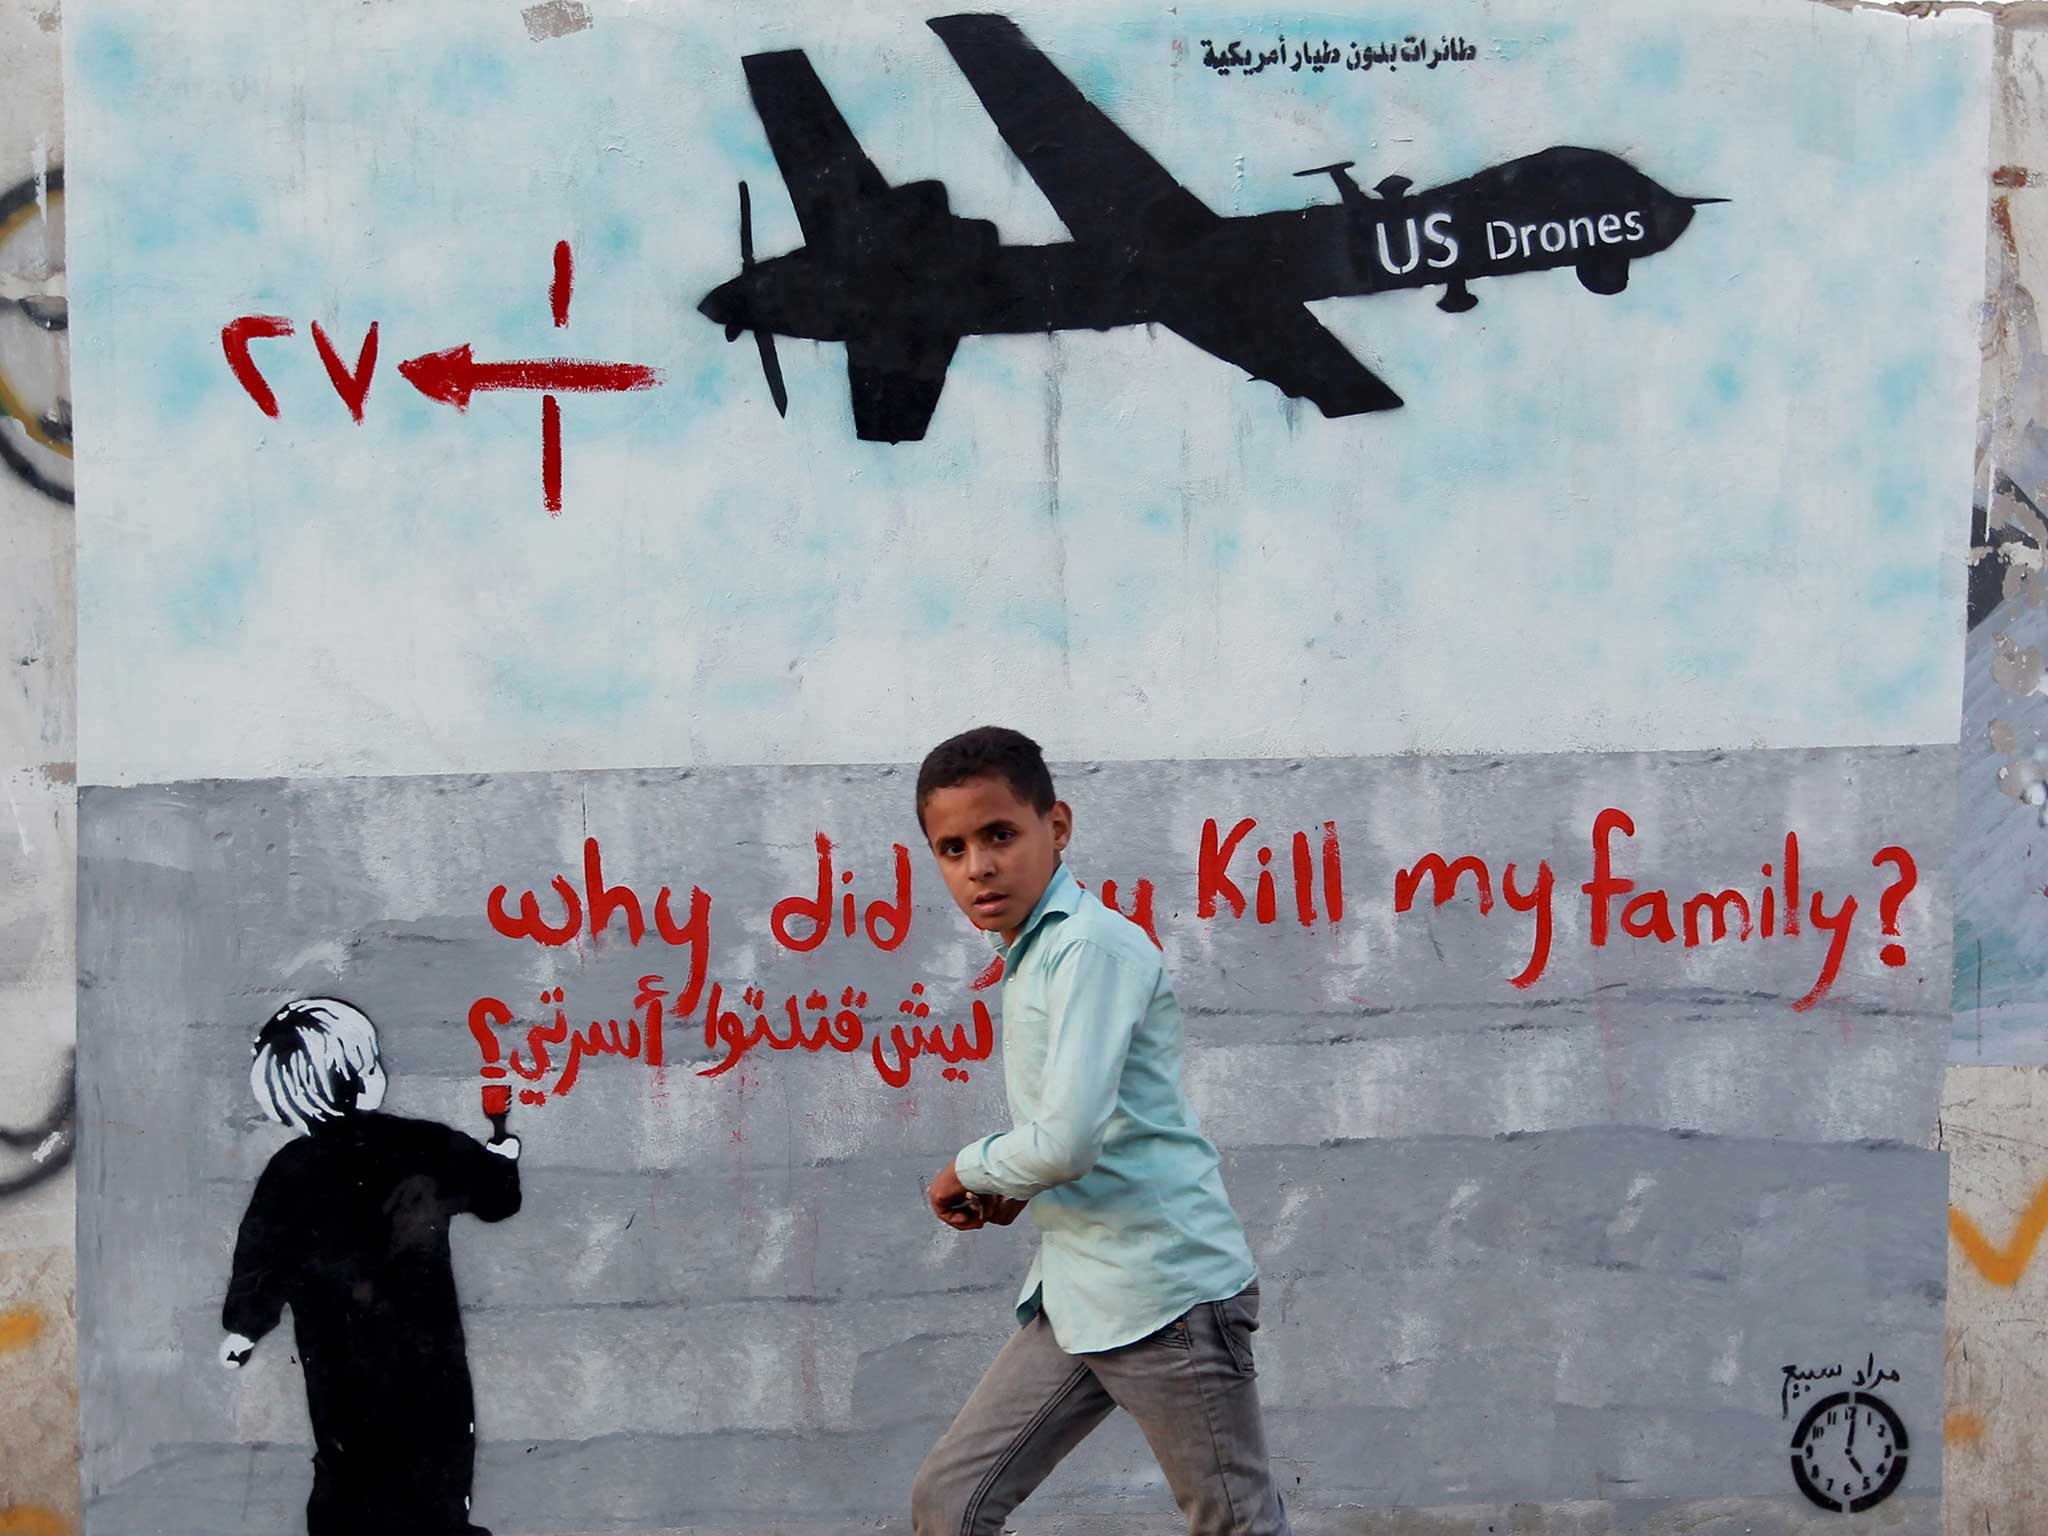 A Yemeni boy runs past a mural painted on the wall of the capital in Sanaa